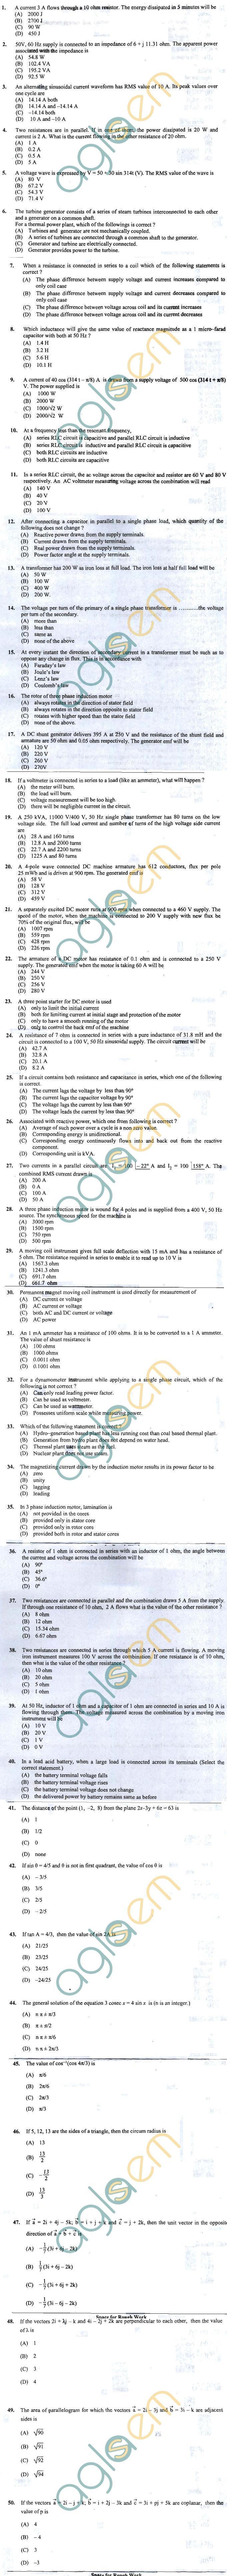 OJEE 2013 Question Paper for LE TECH